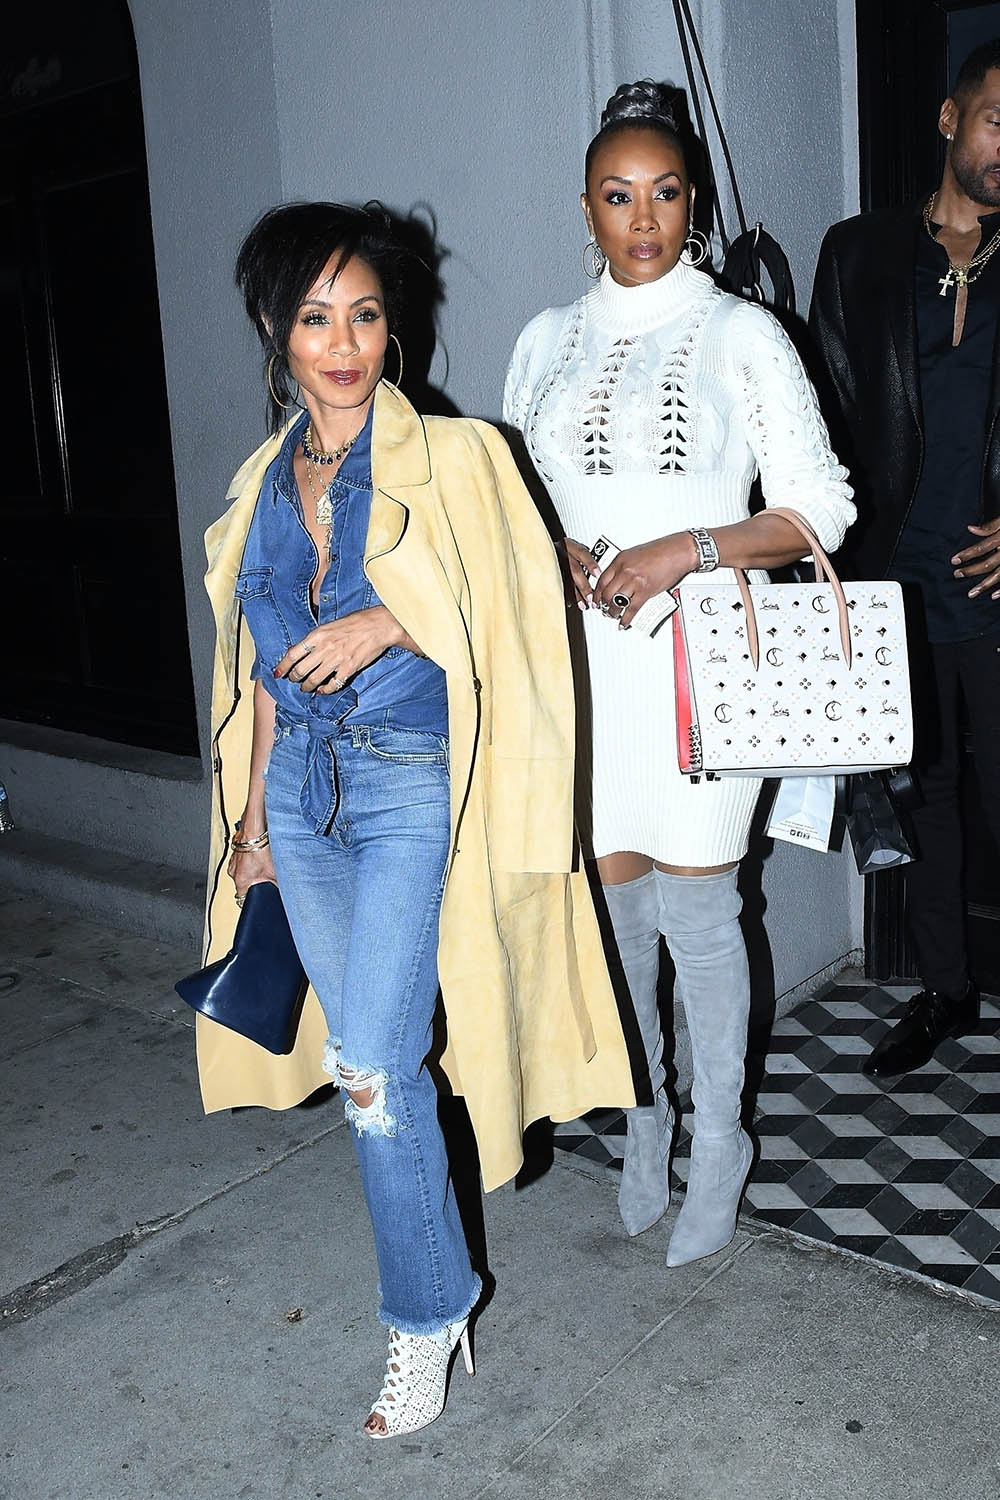 PICS: Jada Pinkett Smith and Vivica A. Fox Out & About in L.A. | Sandra ...